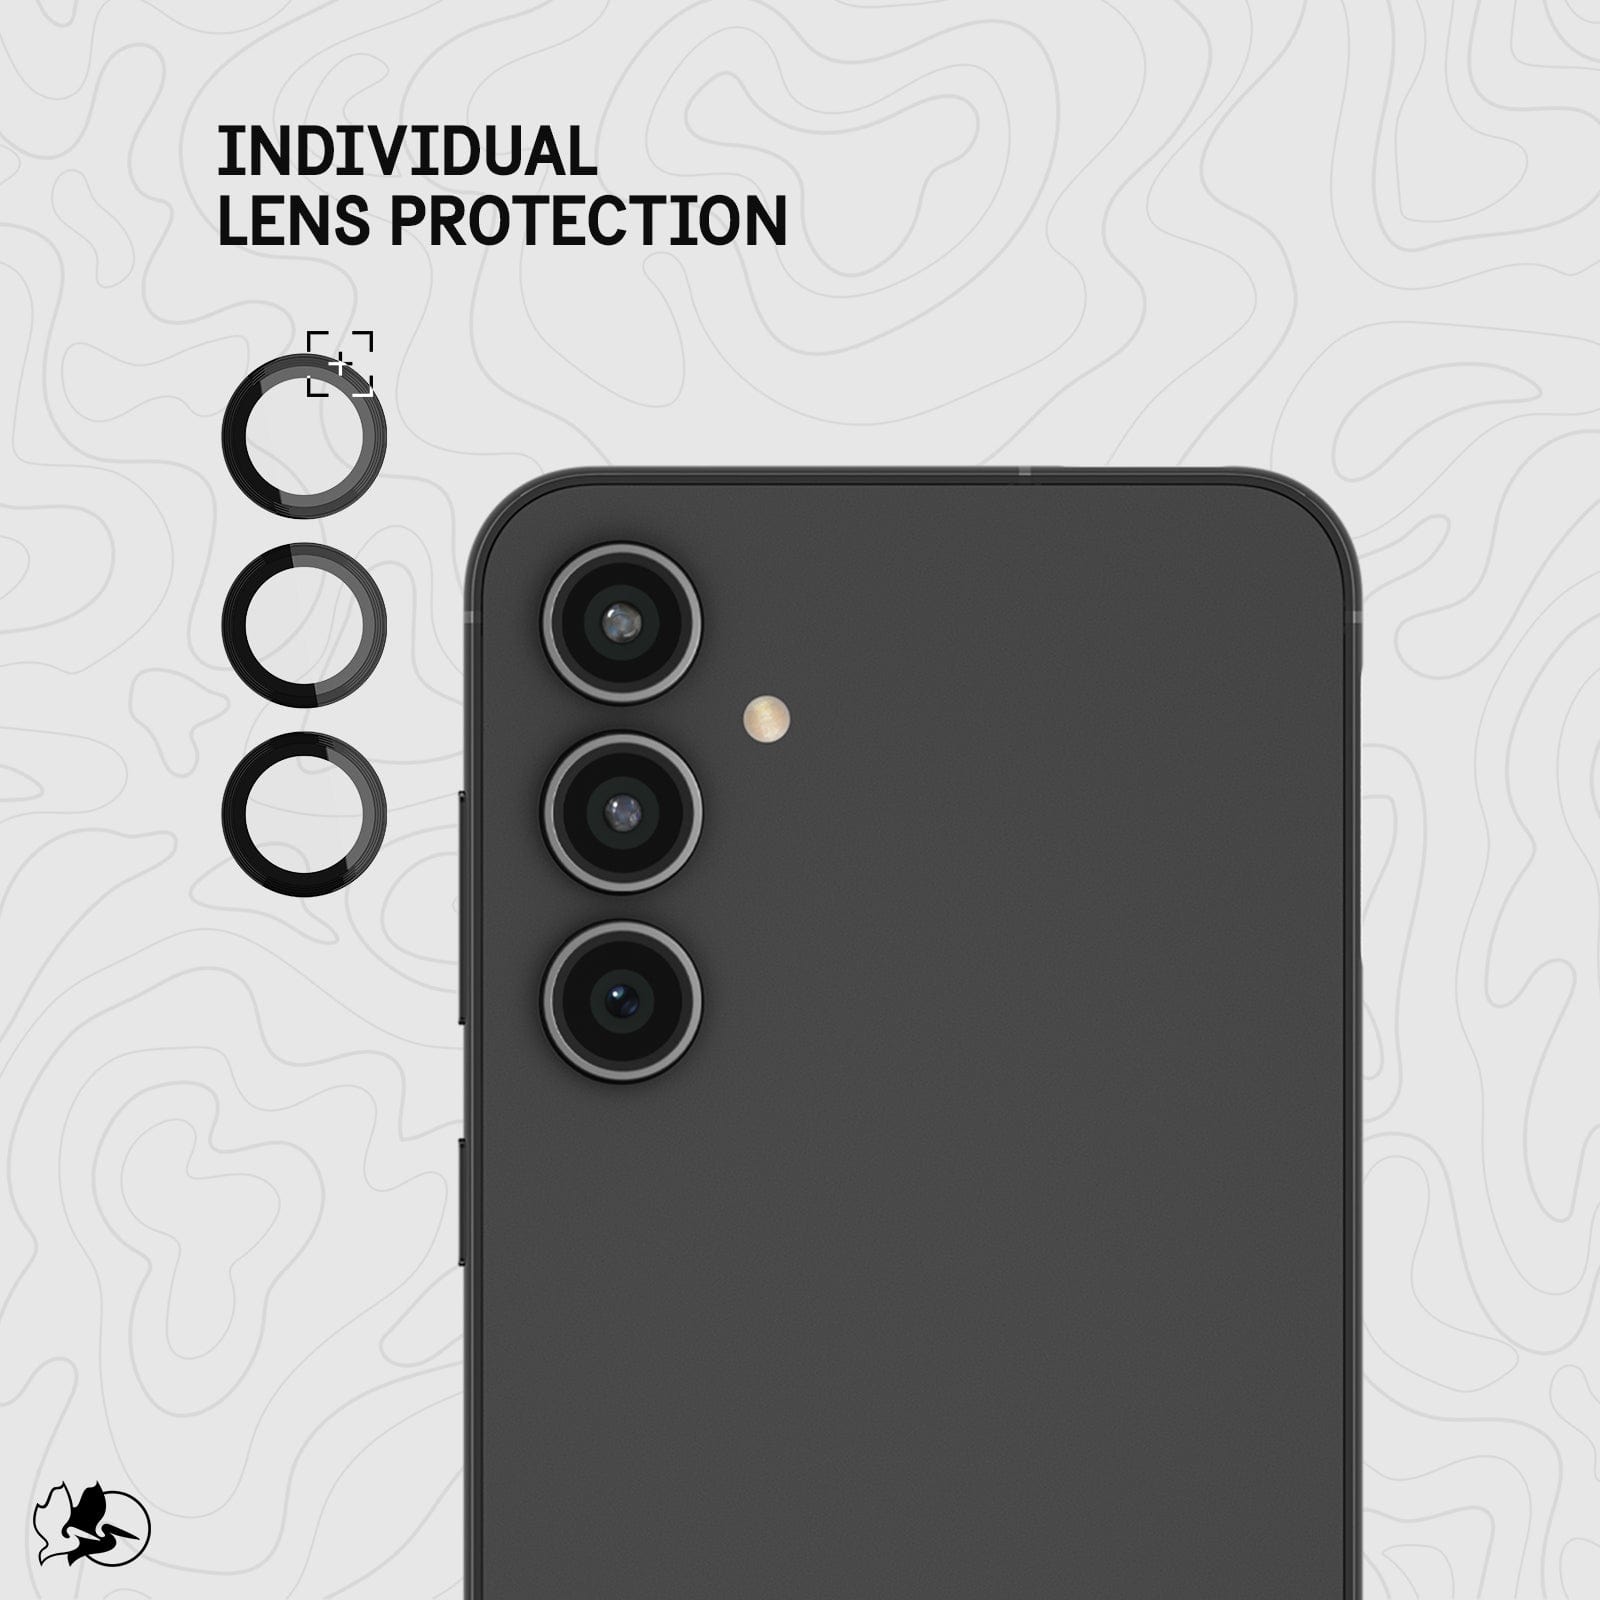 INDVIDUAL LENS PROTECTION